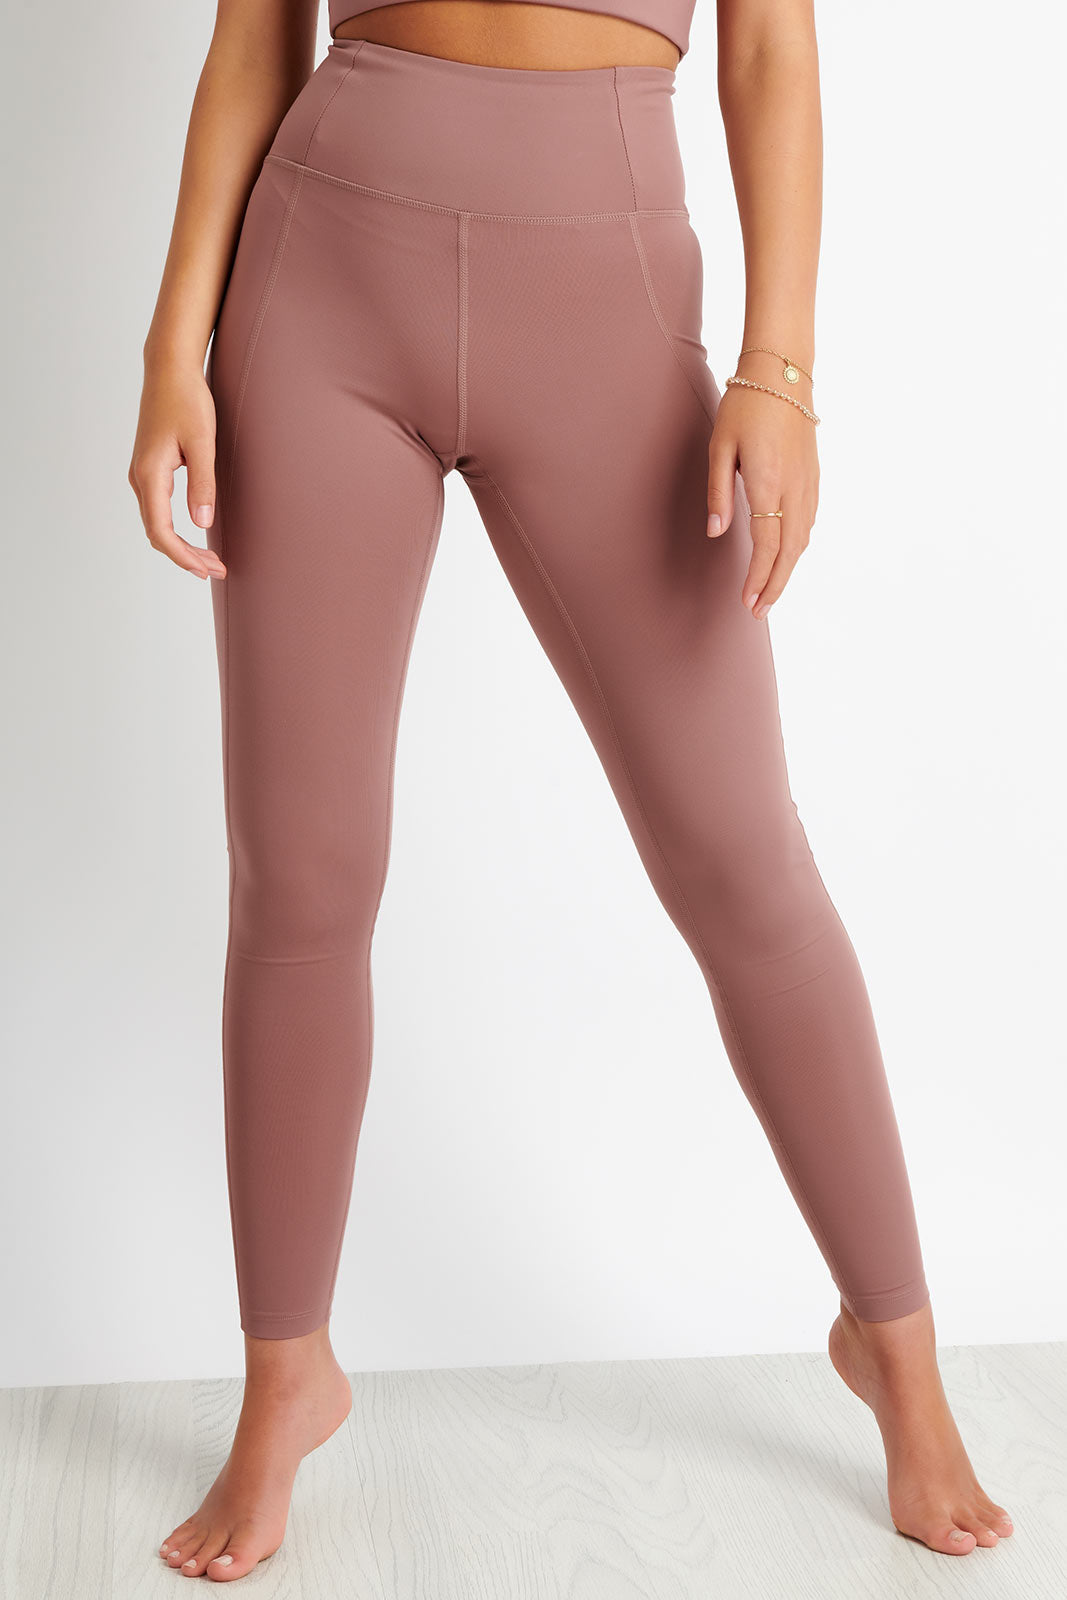 Girlfriend Collective Compressive High Waisted Legging In Pink